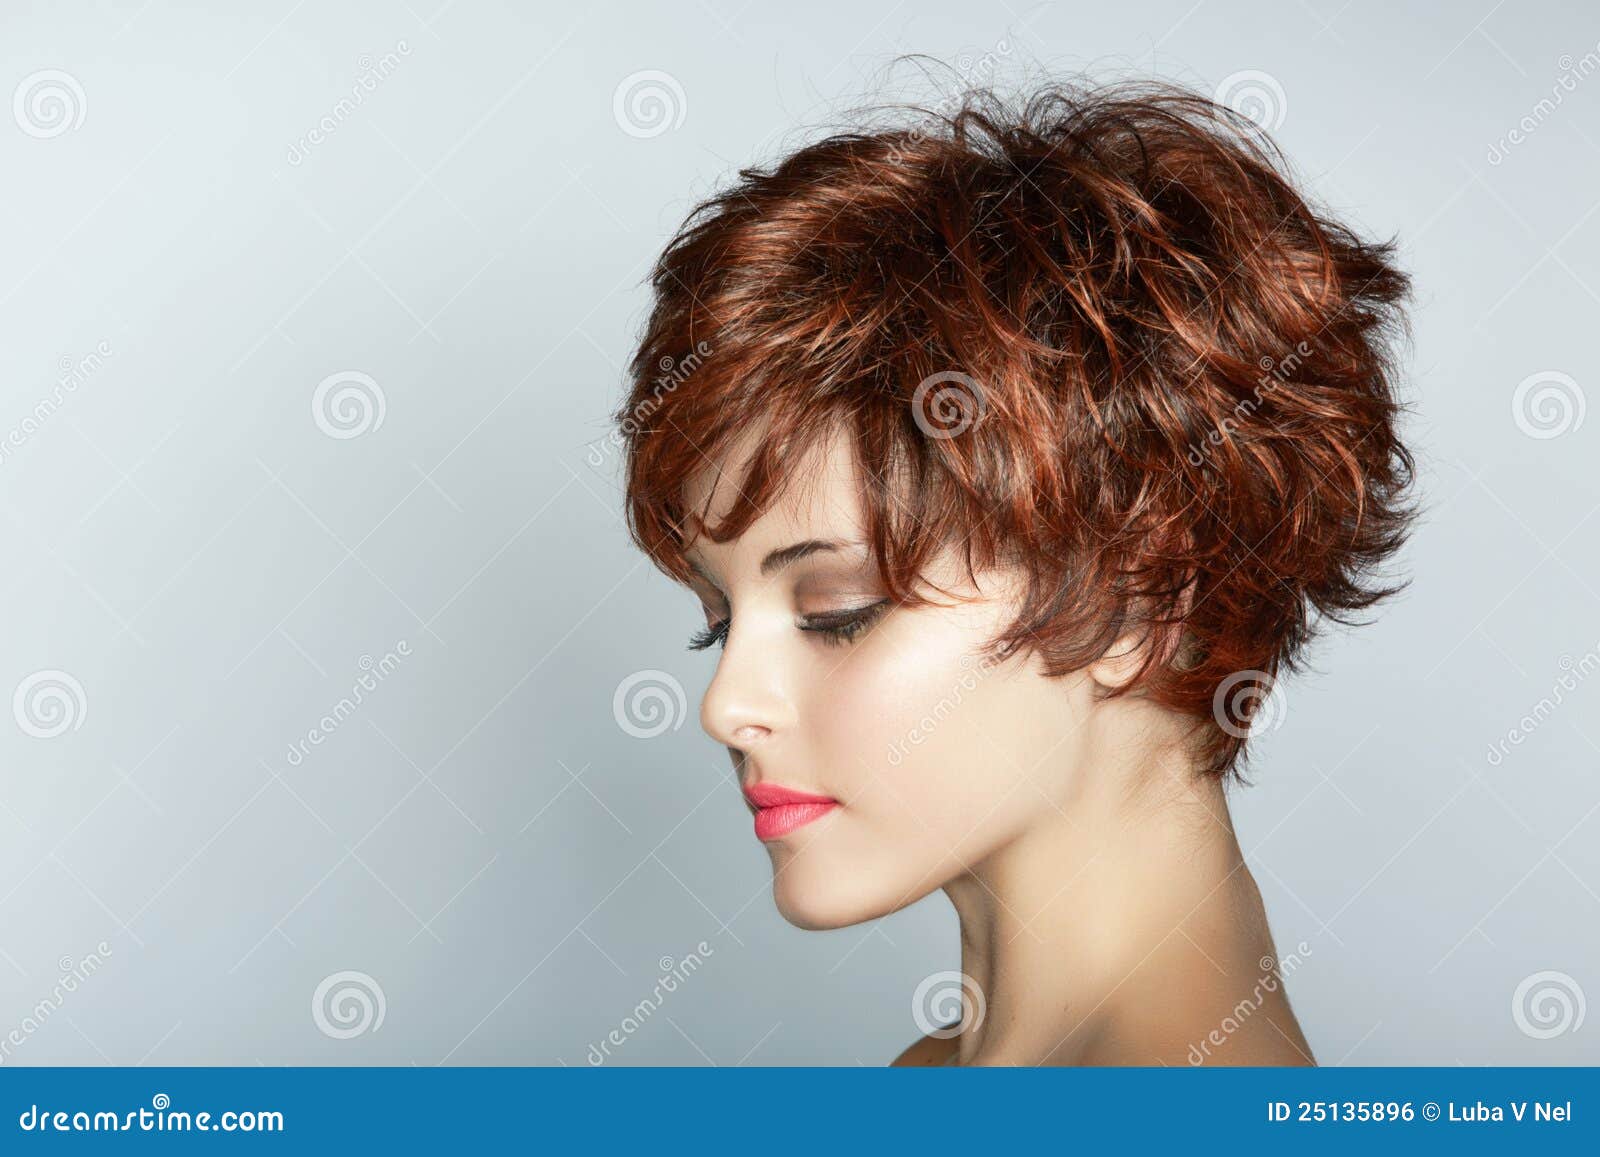 woman with short haircut